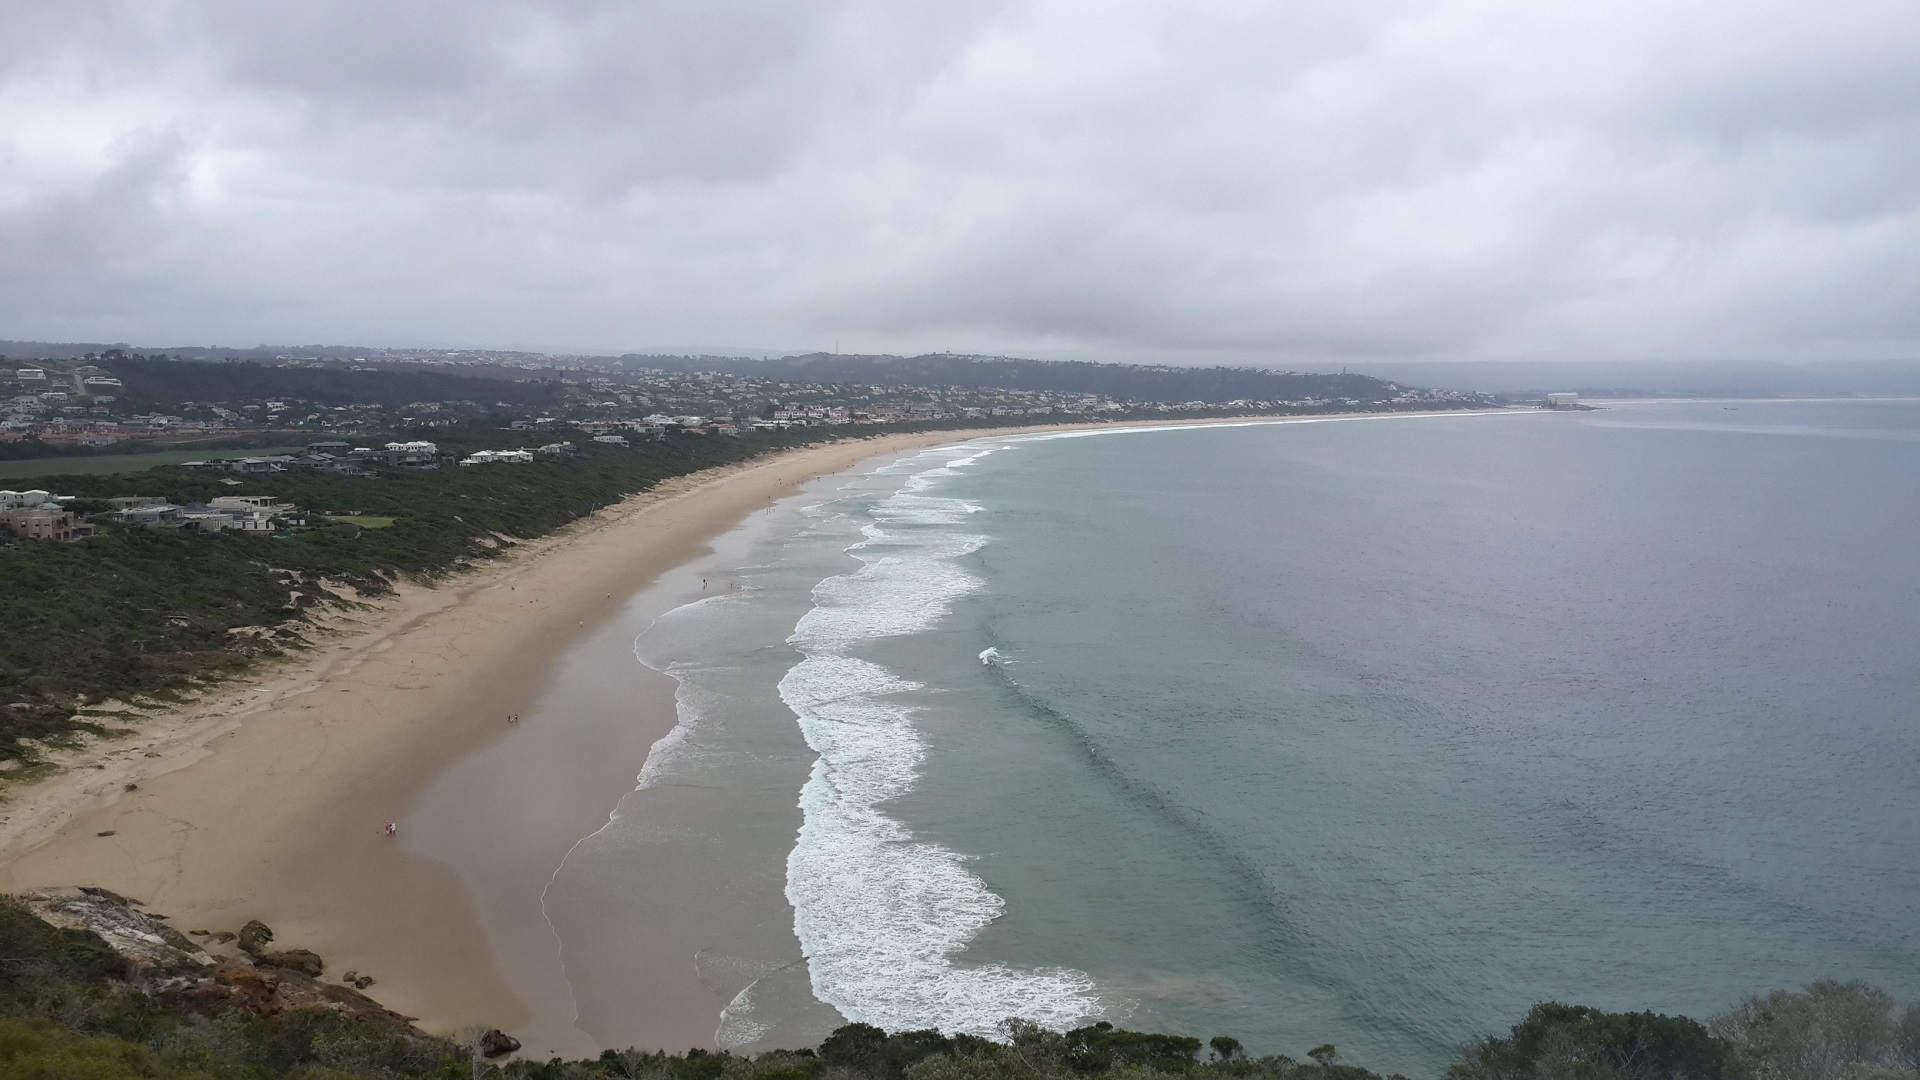 Plettenberg Bay beach from Robberg cape where I did some hiking.